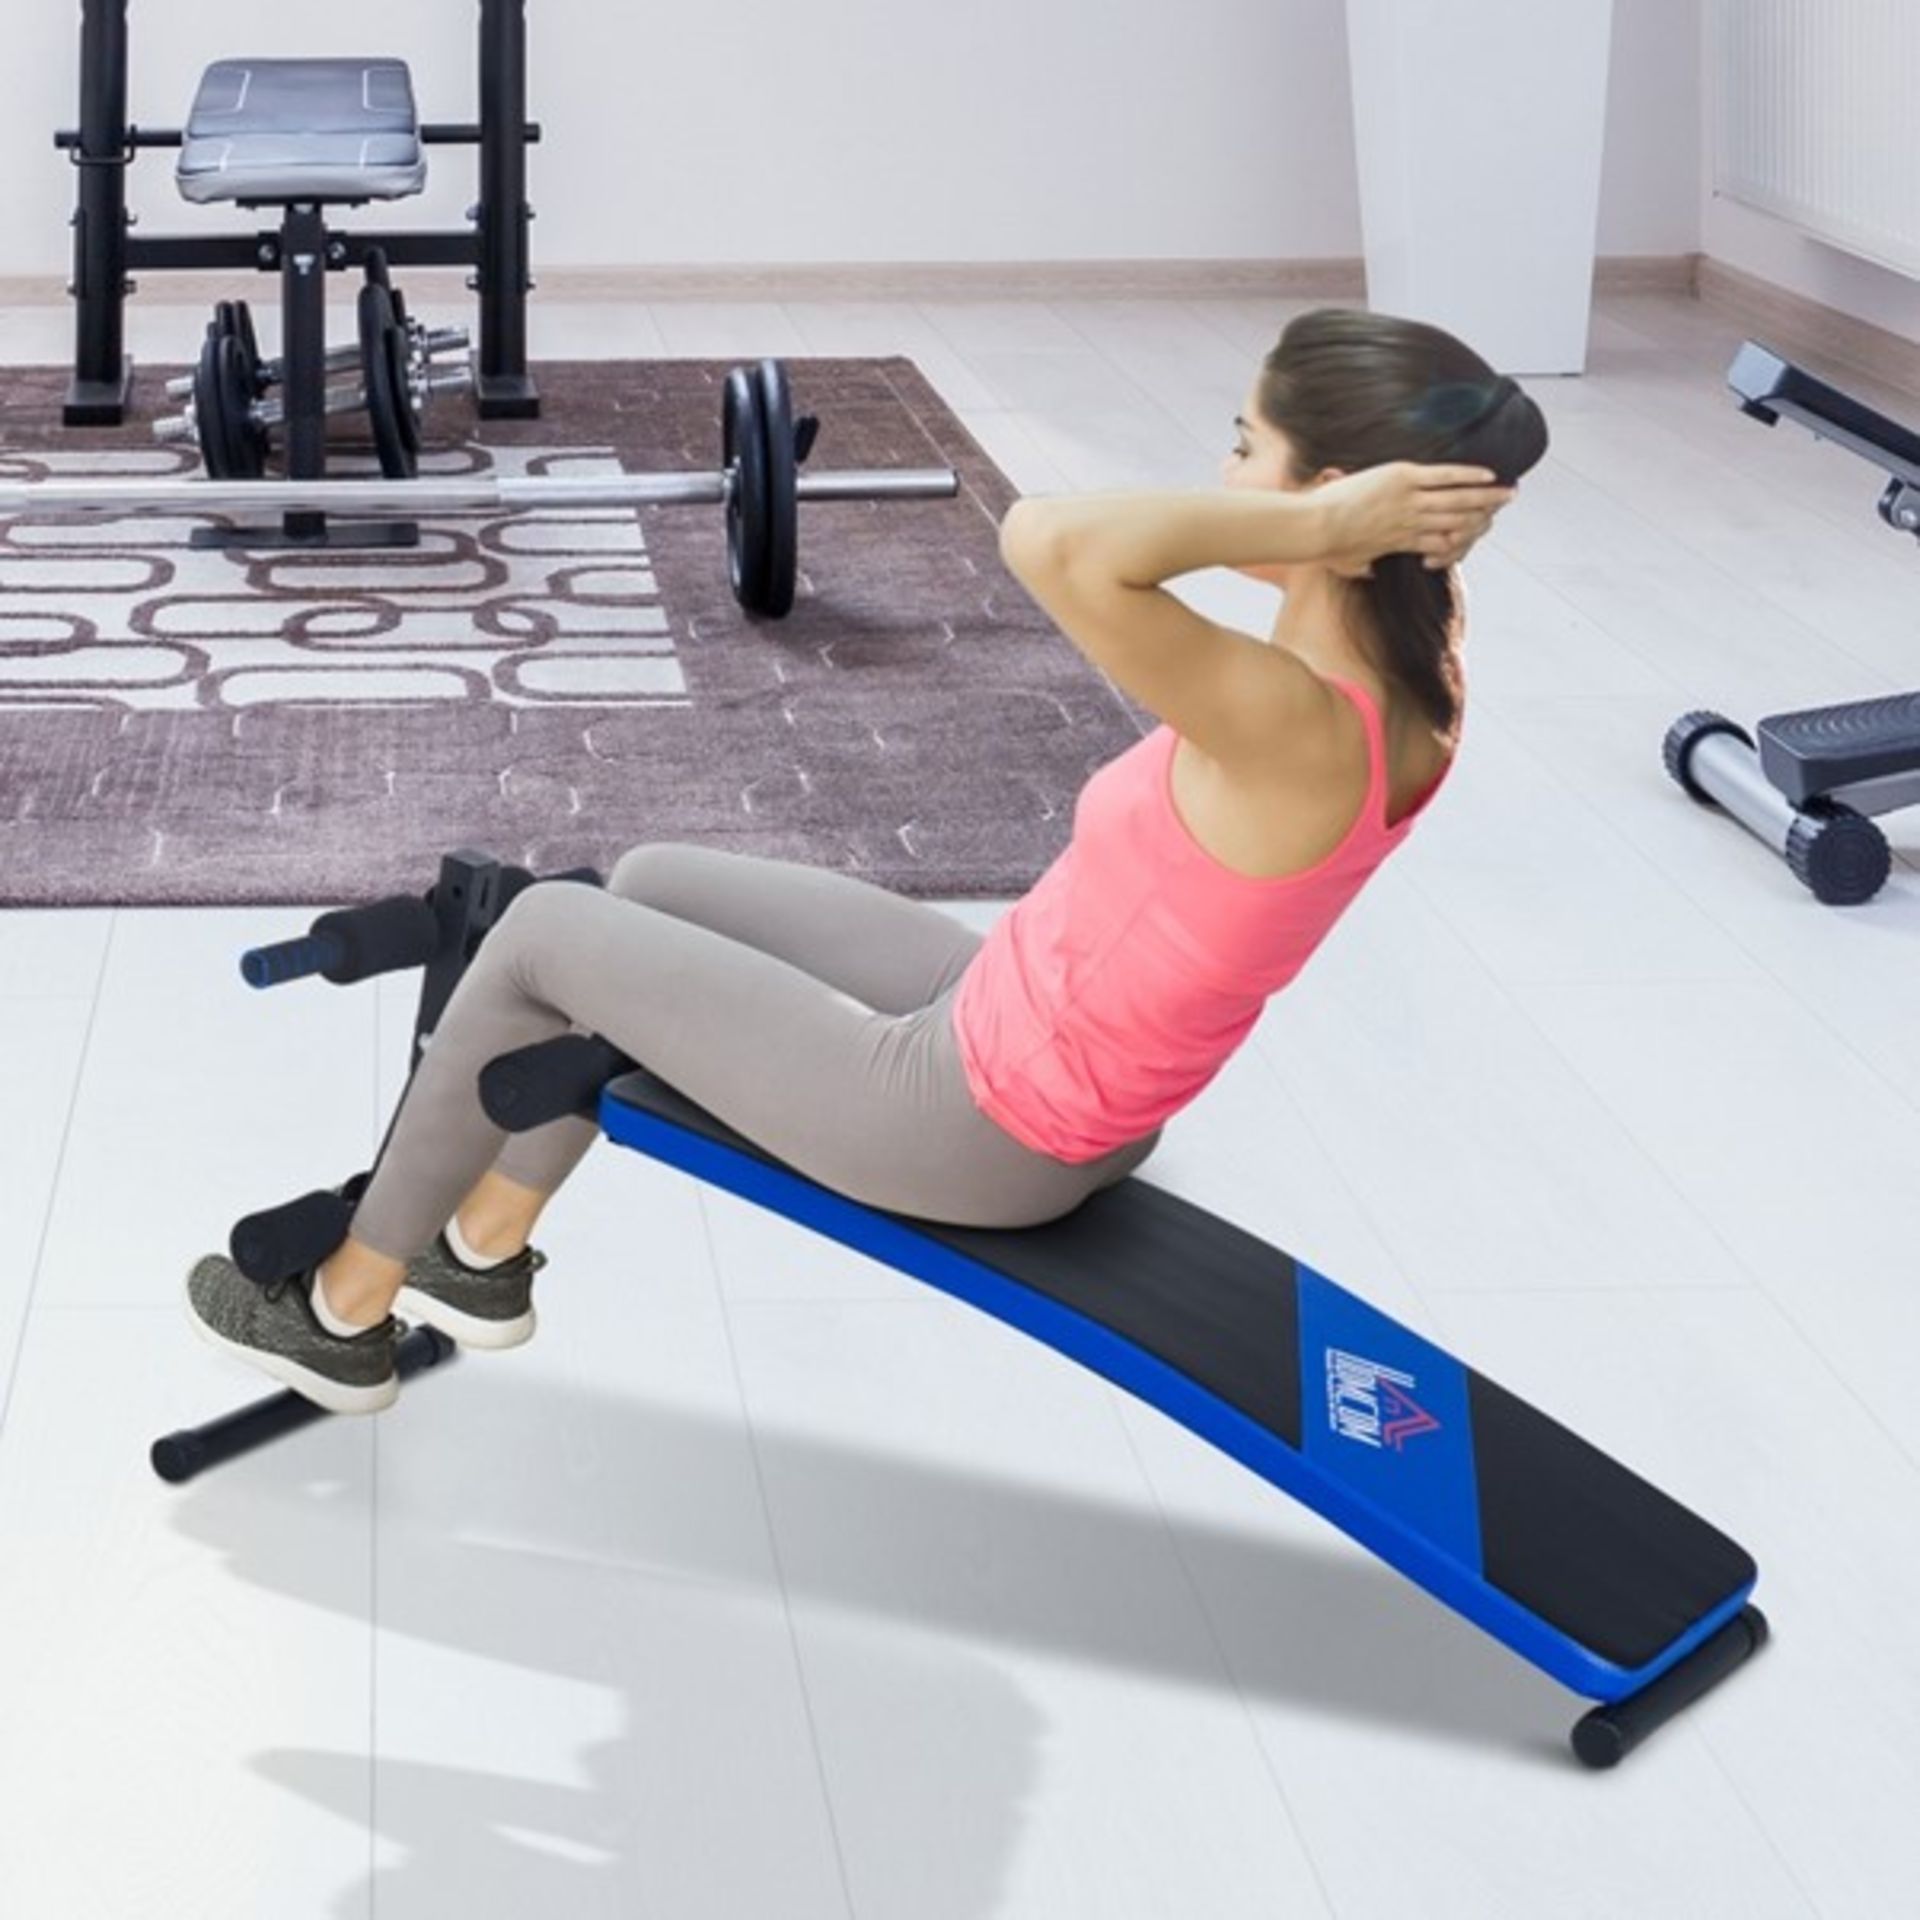 RRP £52.99 - Sit-up Workout Bench, Steel-Black/Blue - Overall Size: 144L x 47W x 51-63H cm. Assembly